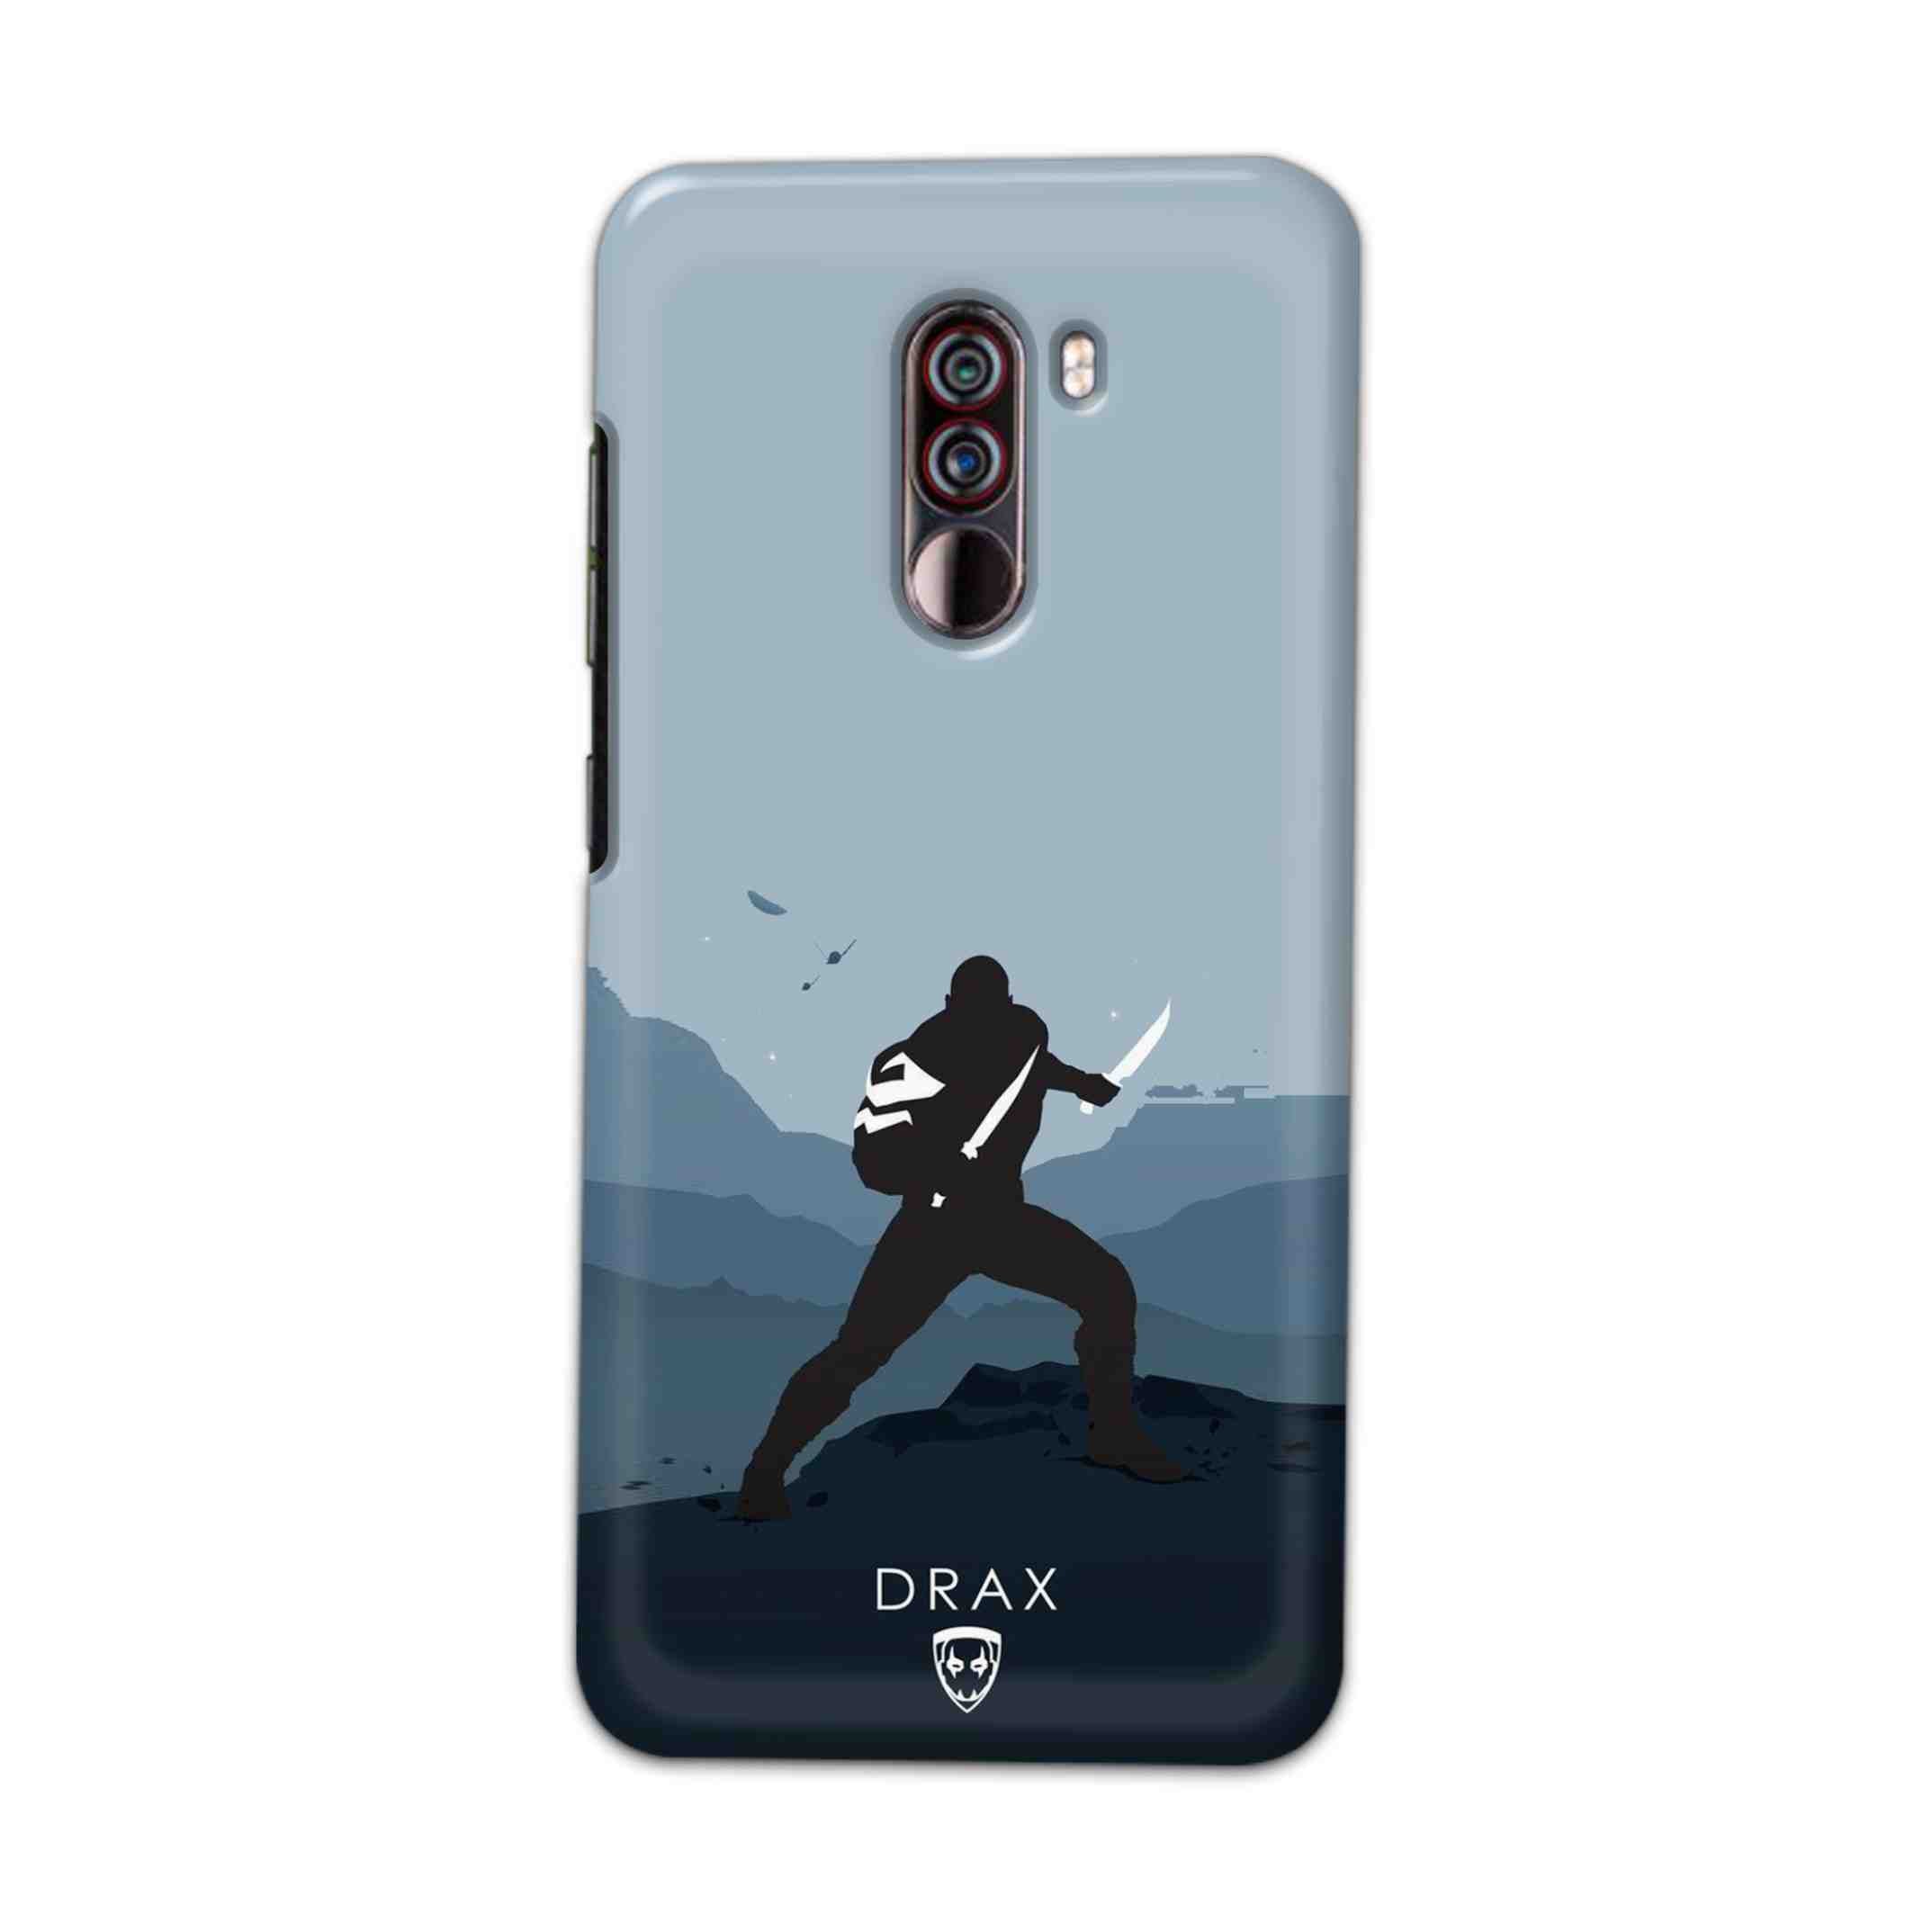 Buy Drax Hard Back Mobile Phone Case Cover For Xiaomi Pocophone F1 Online